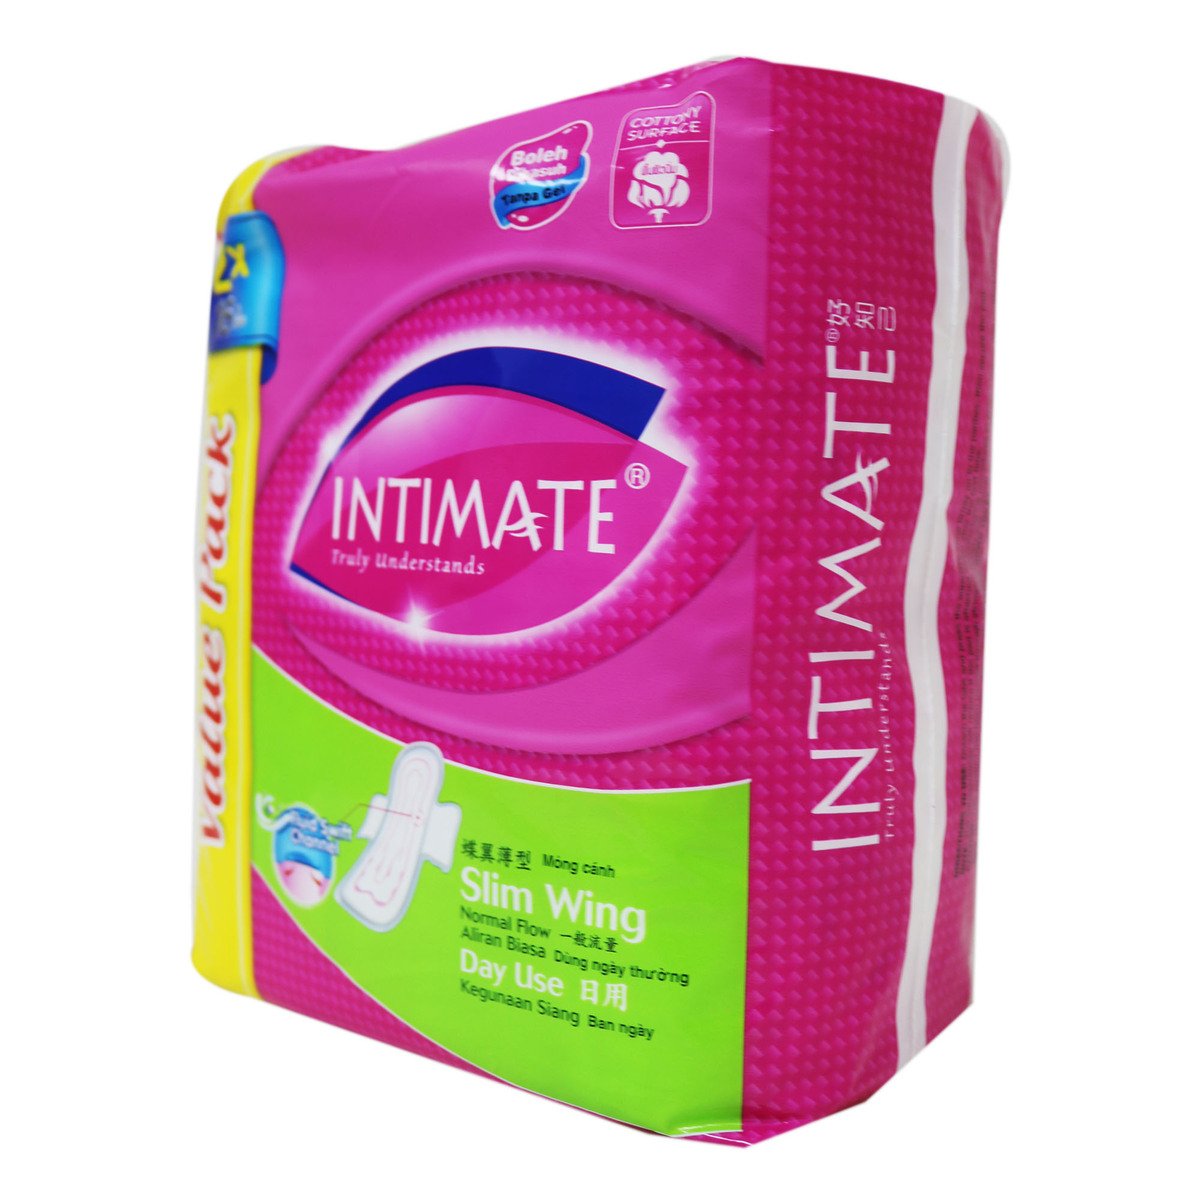 Intimate Daylite Slim Wing 2 x 16 Counts